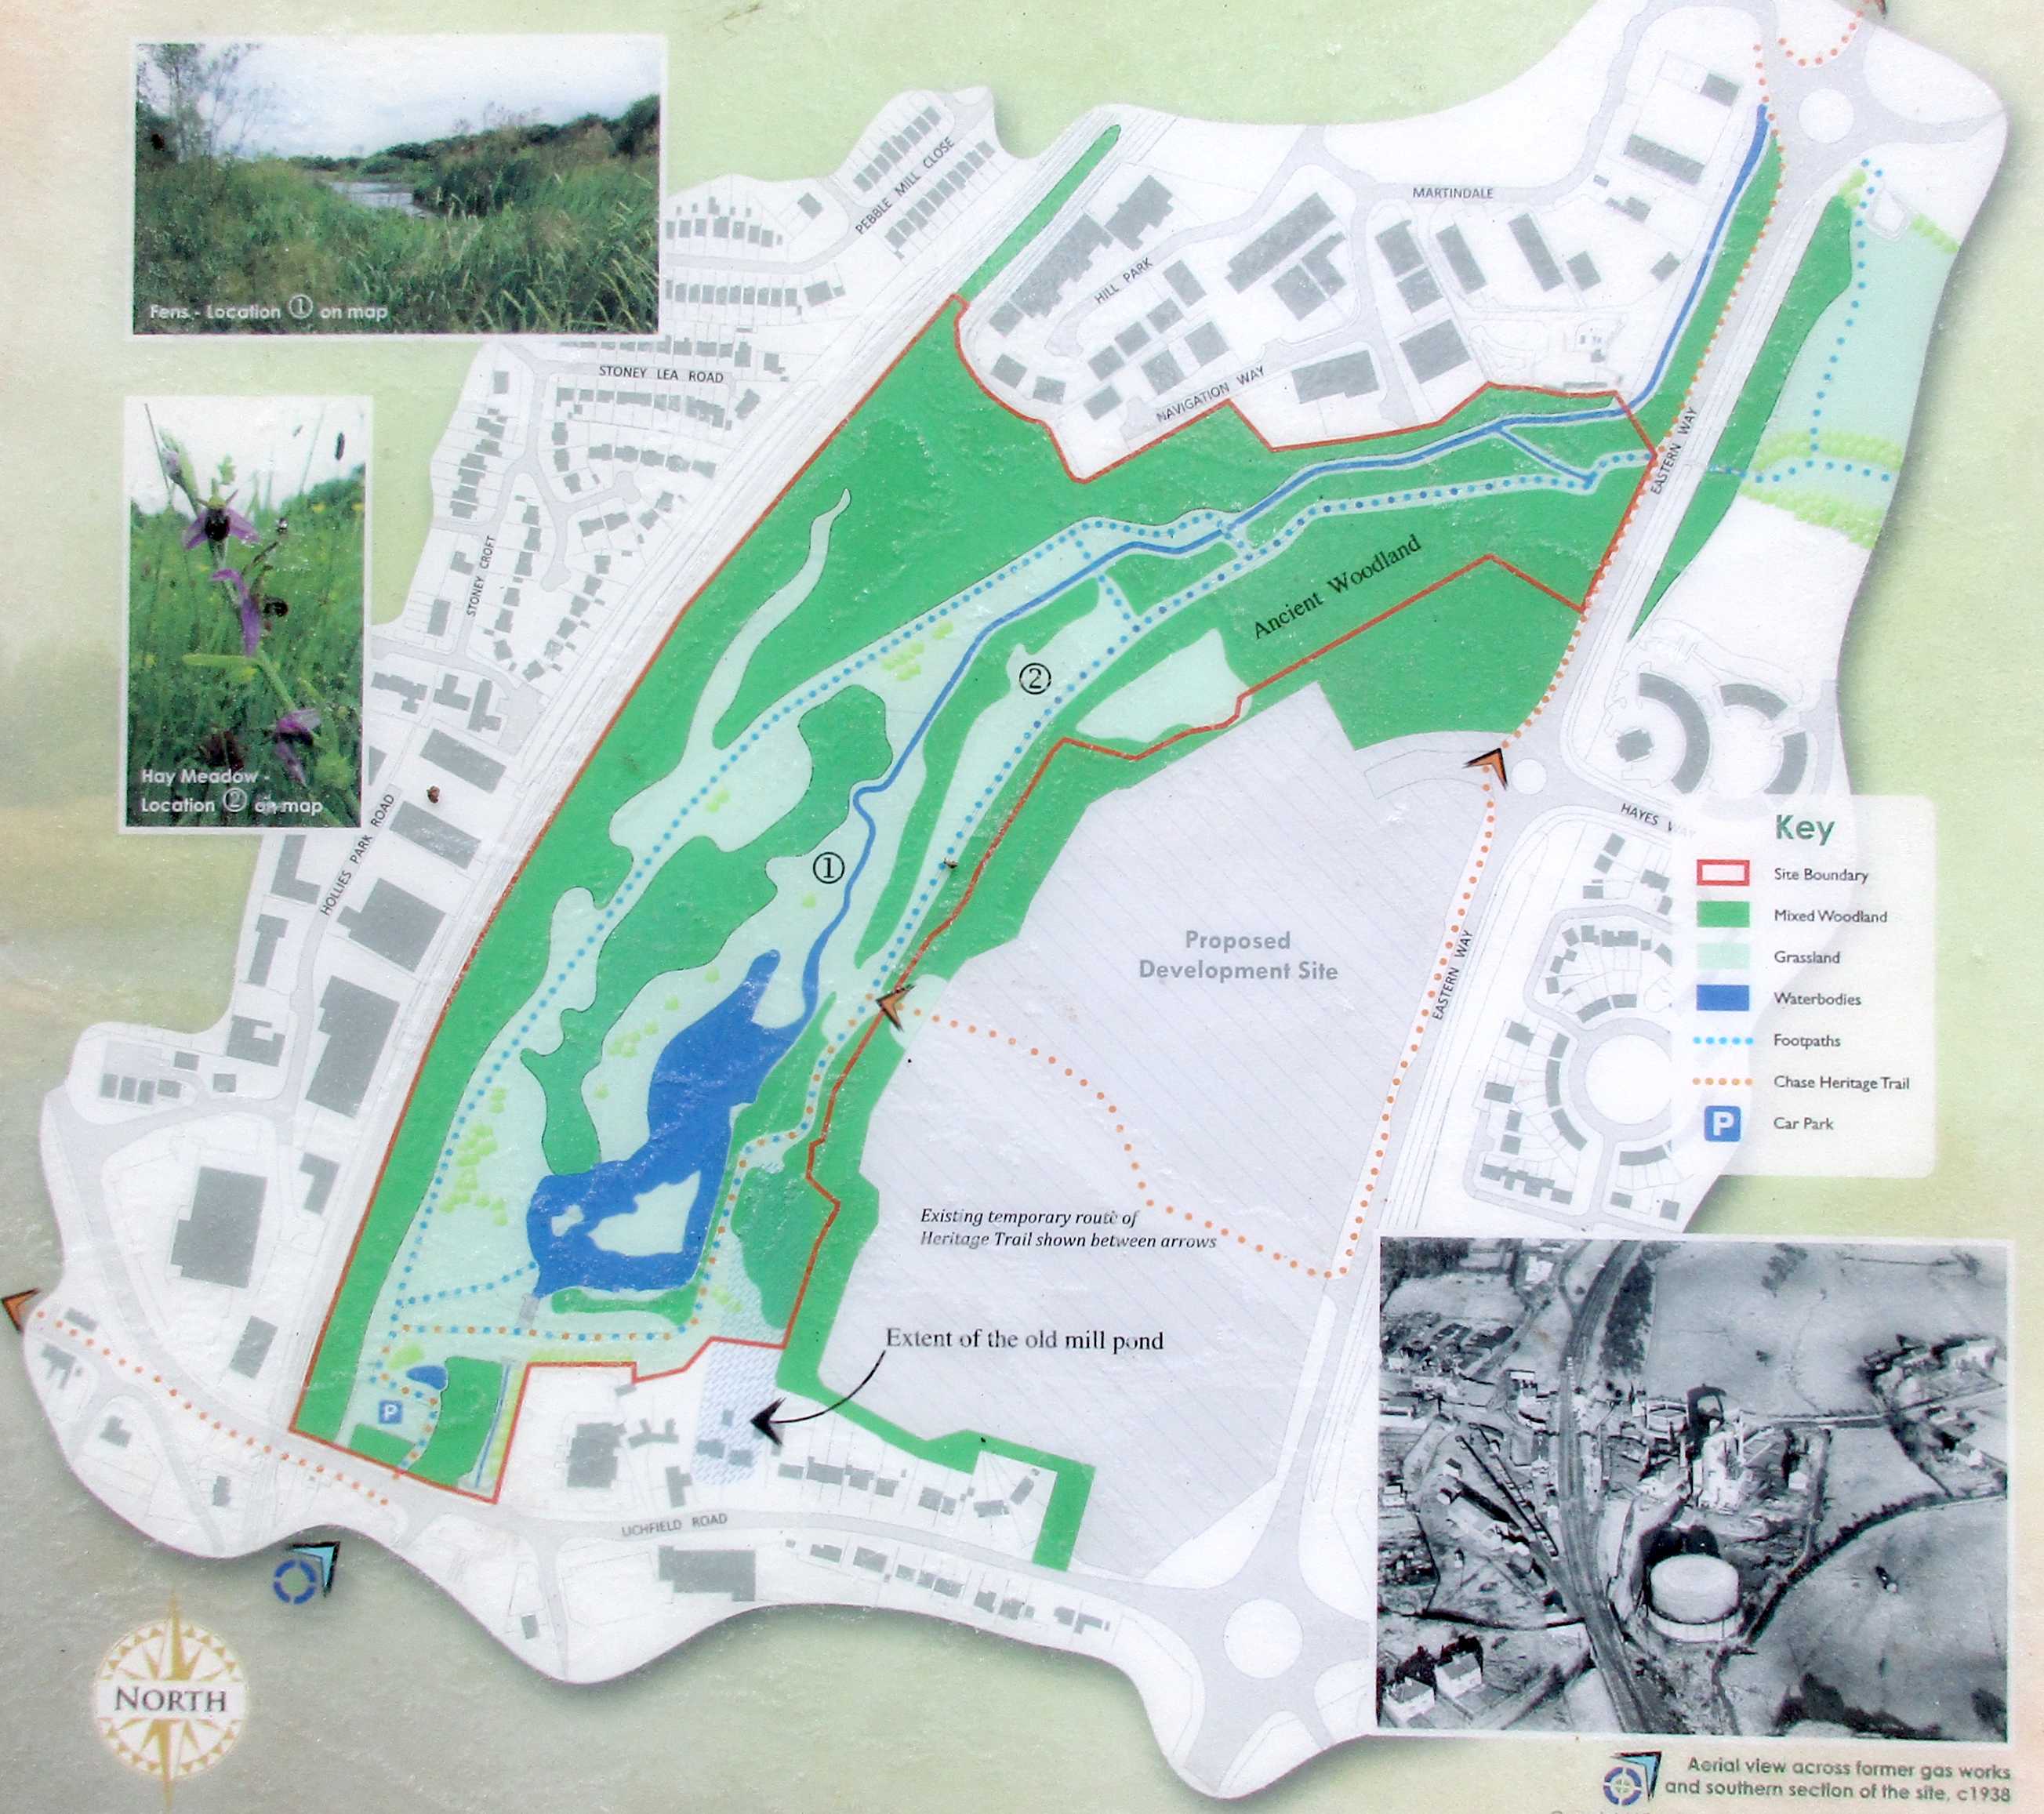 The site map